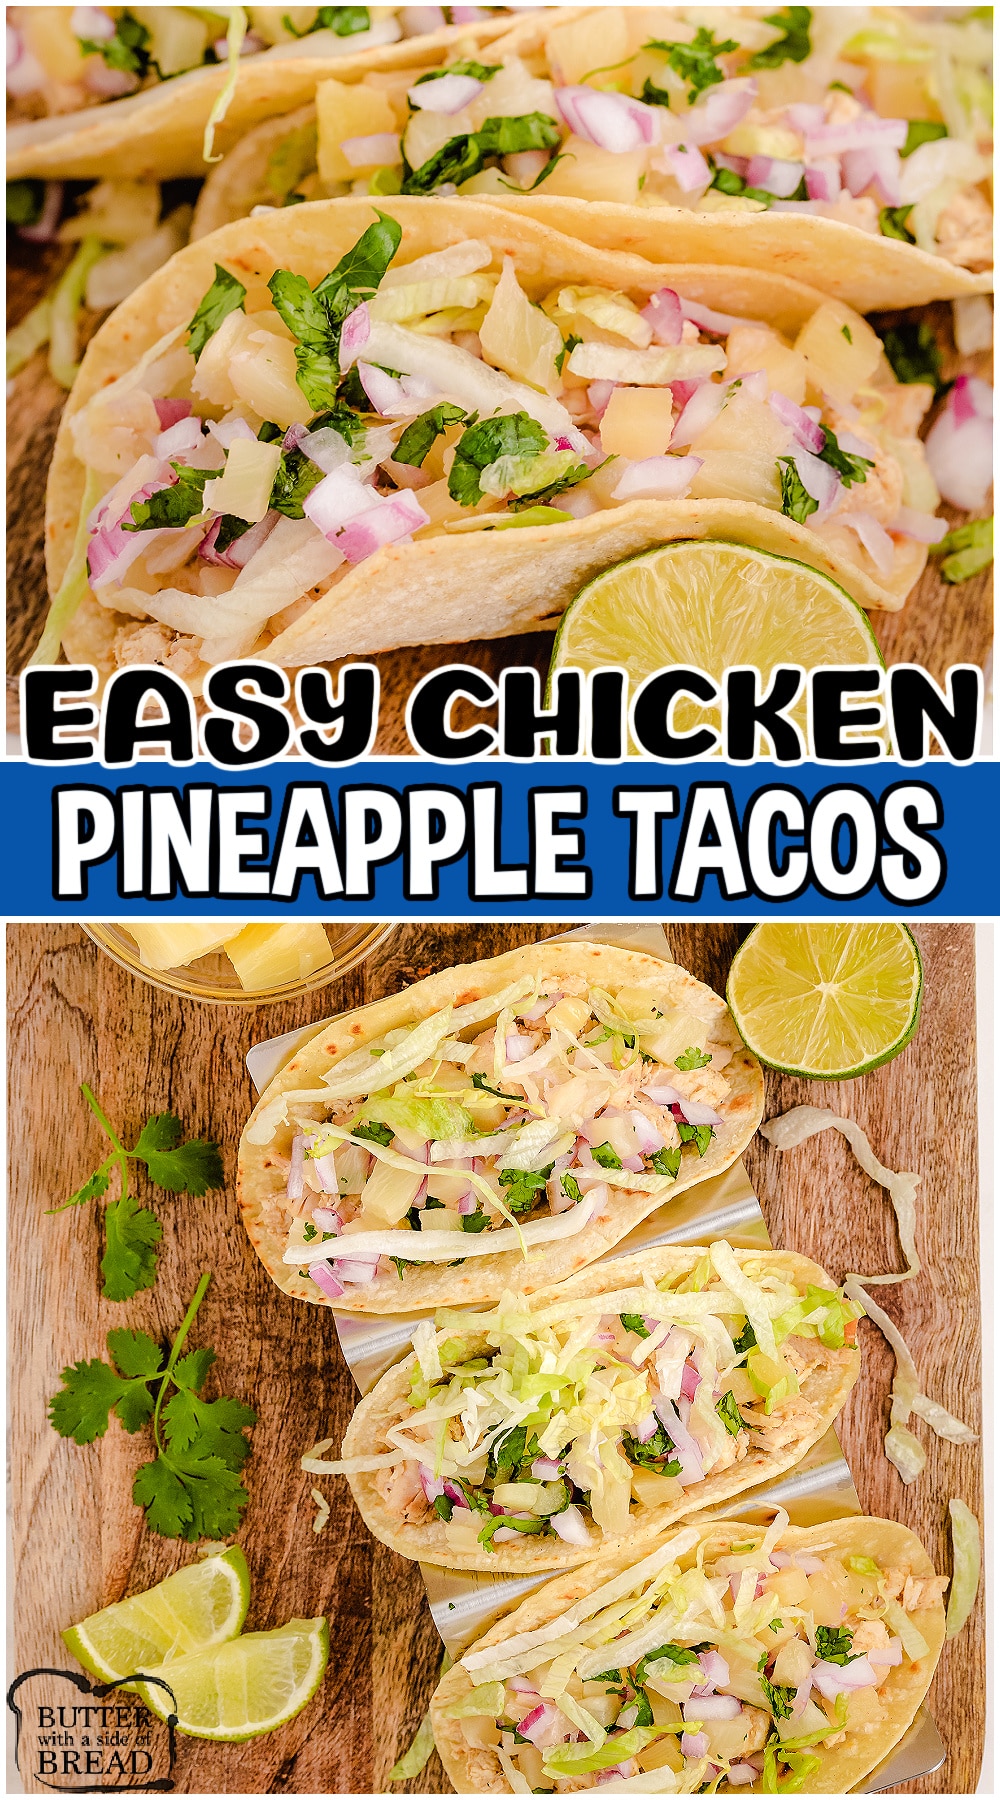 Pineapple Chicken Tacos are a delicious blend of tangy sweet & savory flavors perfect for Taco Tuesday! Easy rotisserie chicken tacos with pineapple salsa come together fast and are a crowd pleaser!